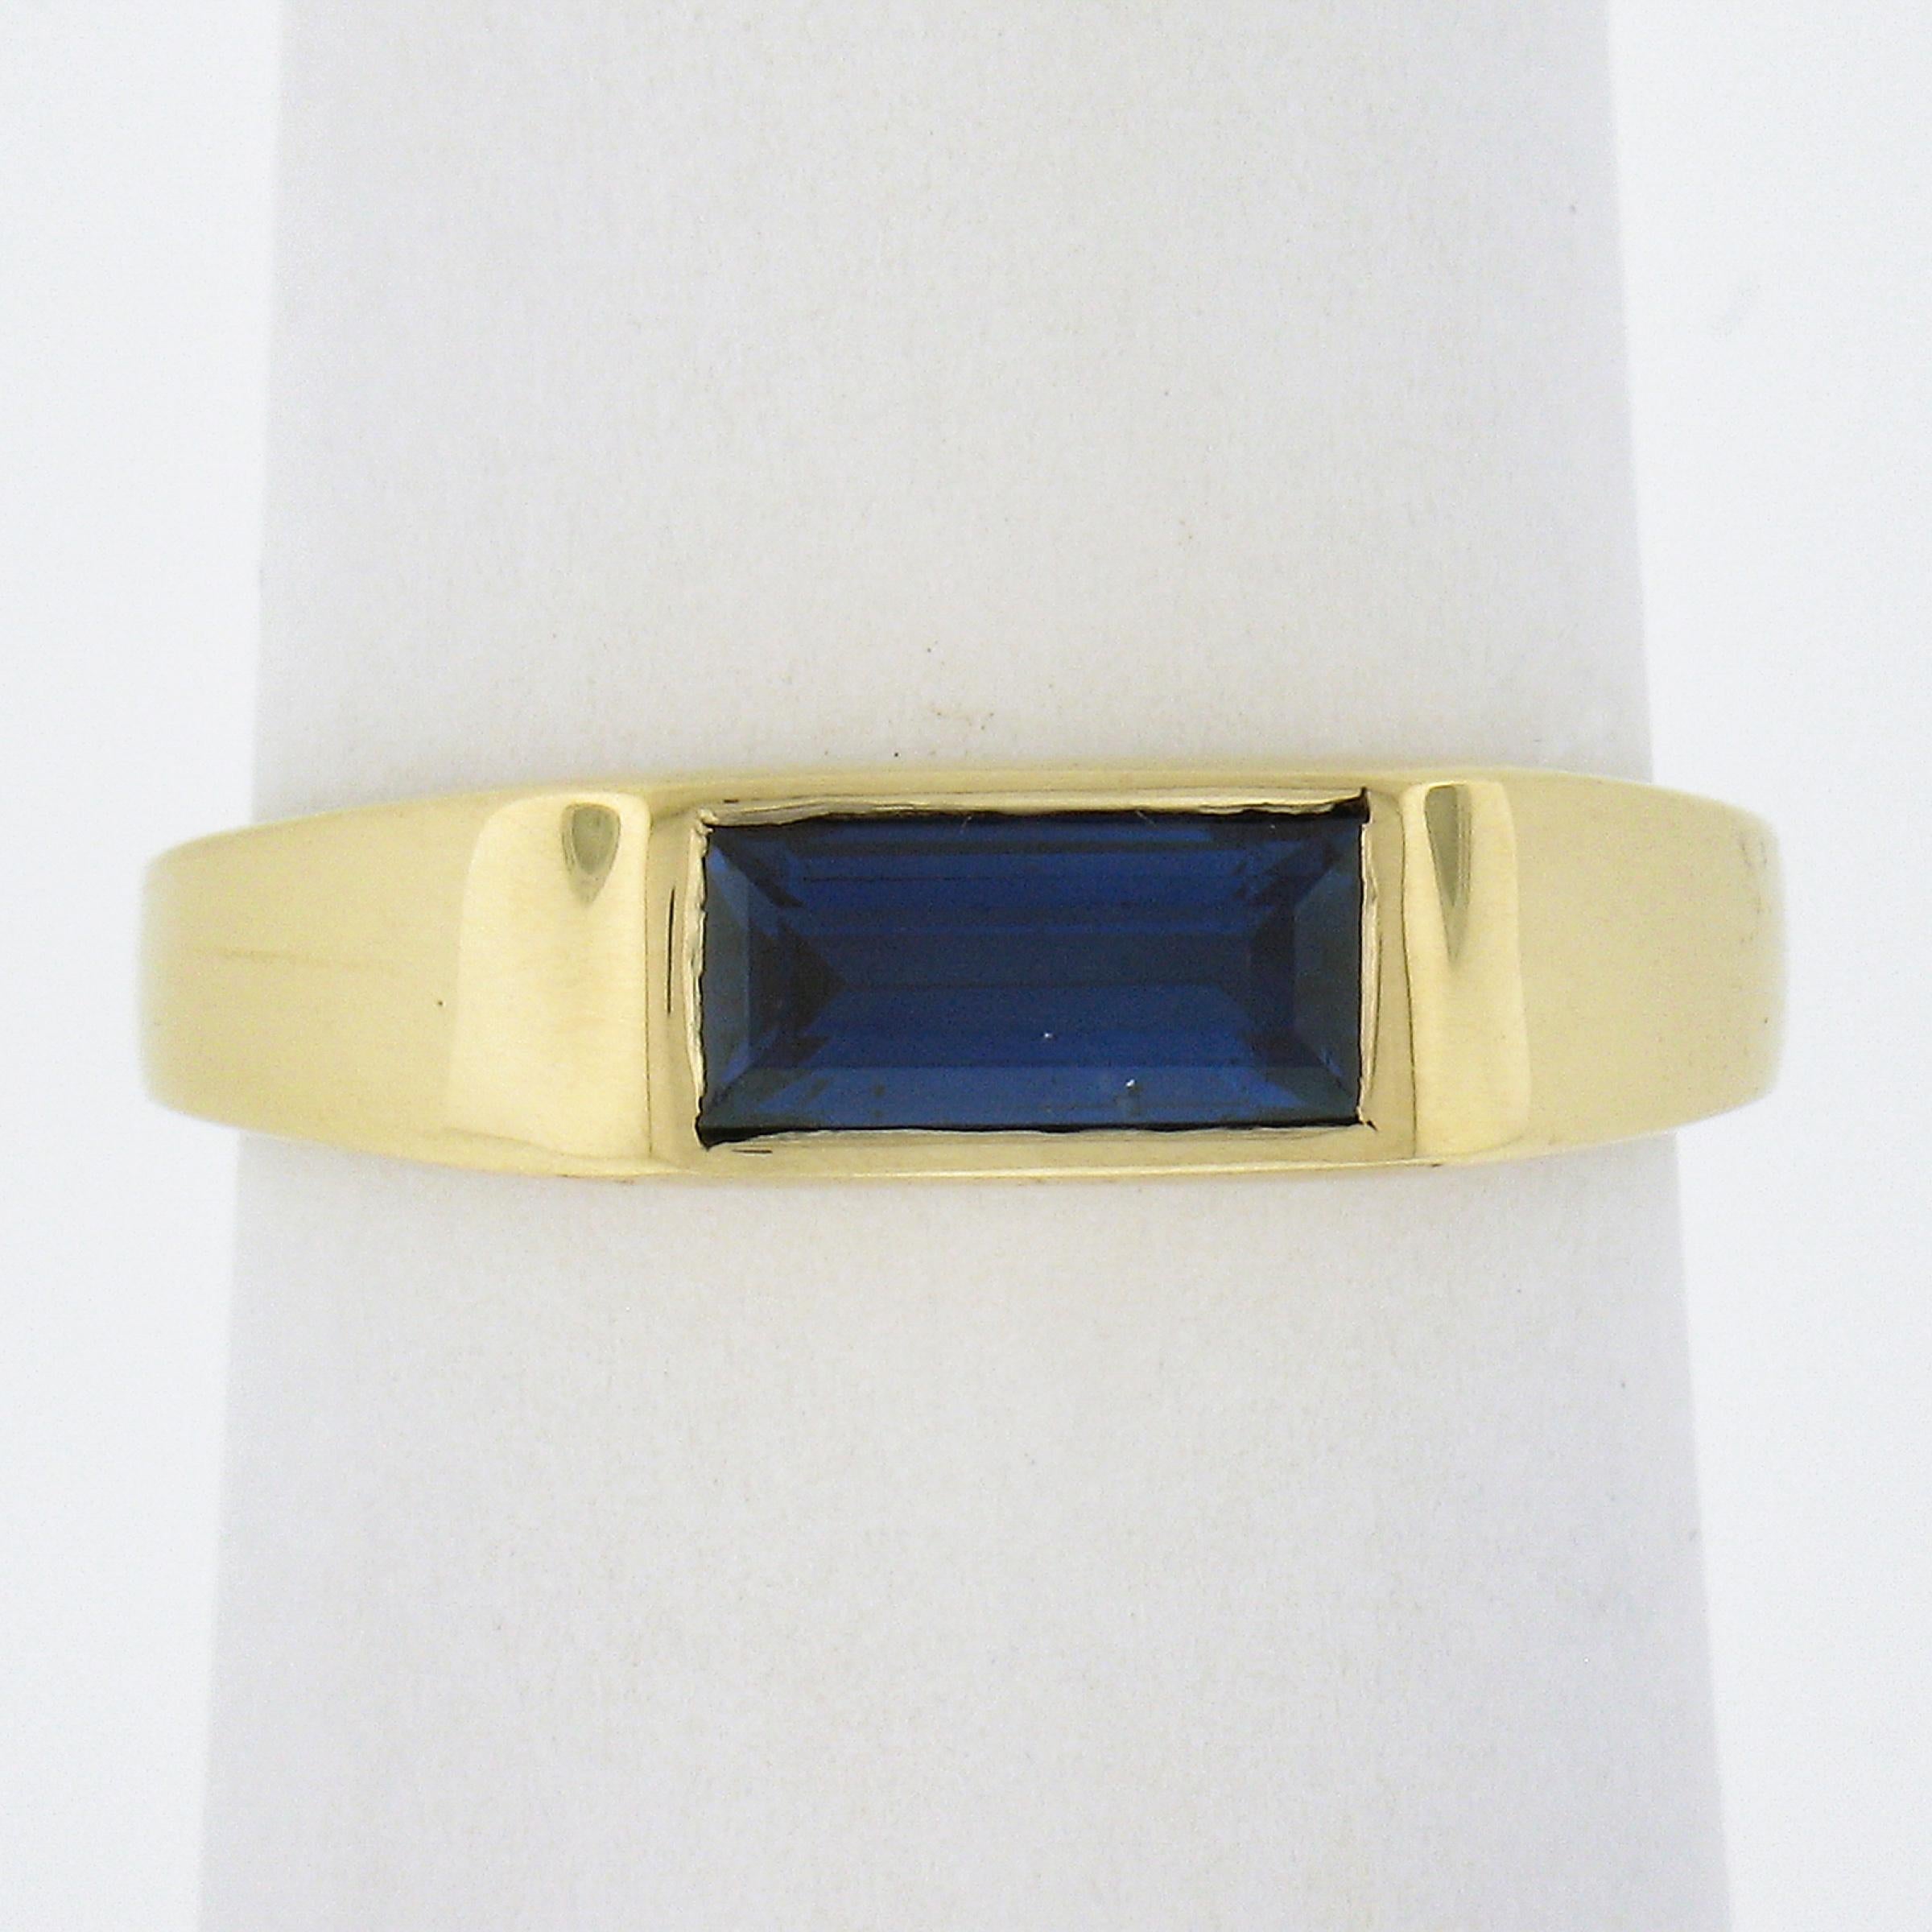 --Stone(s):--
(1) Natural Genuine Sapphire - Rectangular Step Cut - Bezel Set - Blue Color - 0.88ct (exact - certified) - VERY NICE CLEAN COLOR - NO HEAT
** See Certification Details Below for Complete Info **

Material: Solid 18k Yellow